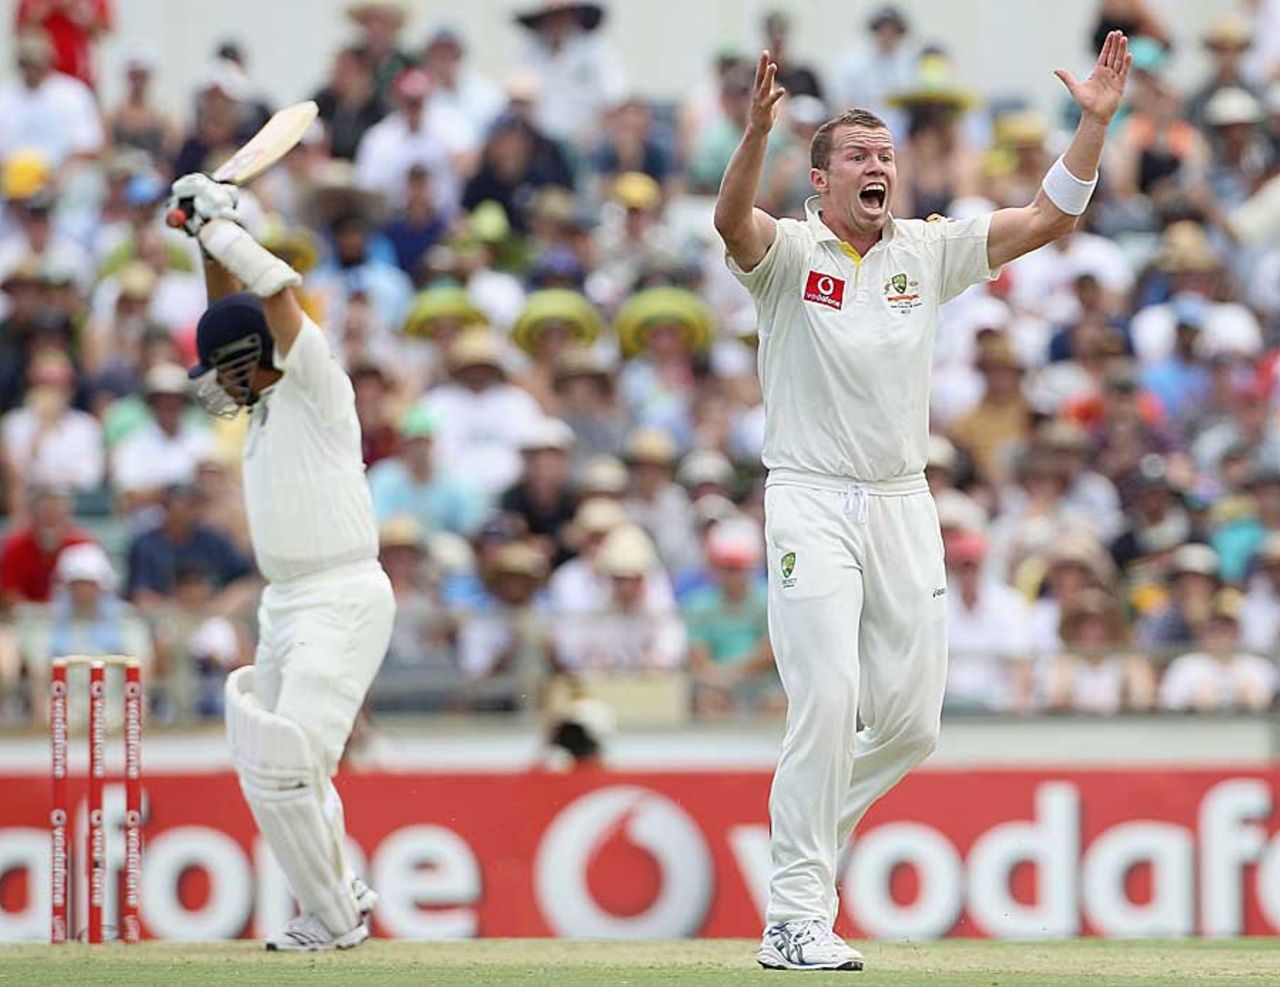 Peter Siddle appeals unsuccessfully for an lbw against Sachin Tendulkar, Australia v India, 3rd Test, Perth, 1st day, January 13, 2012